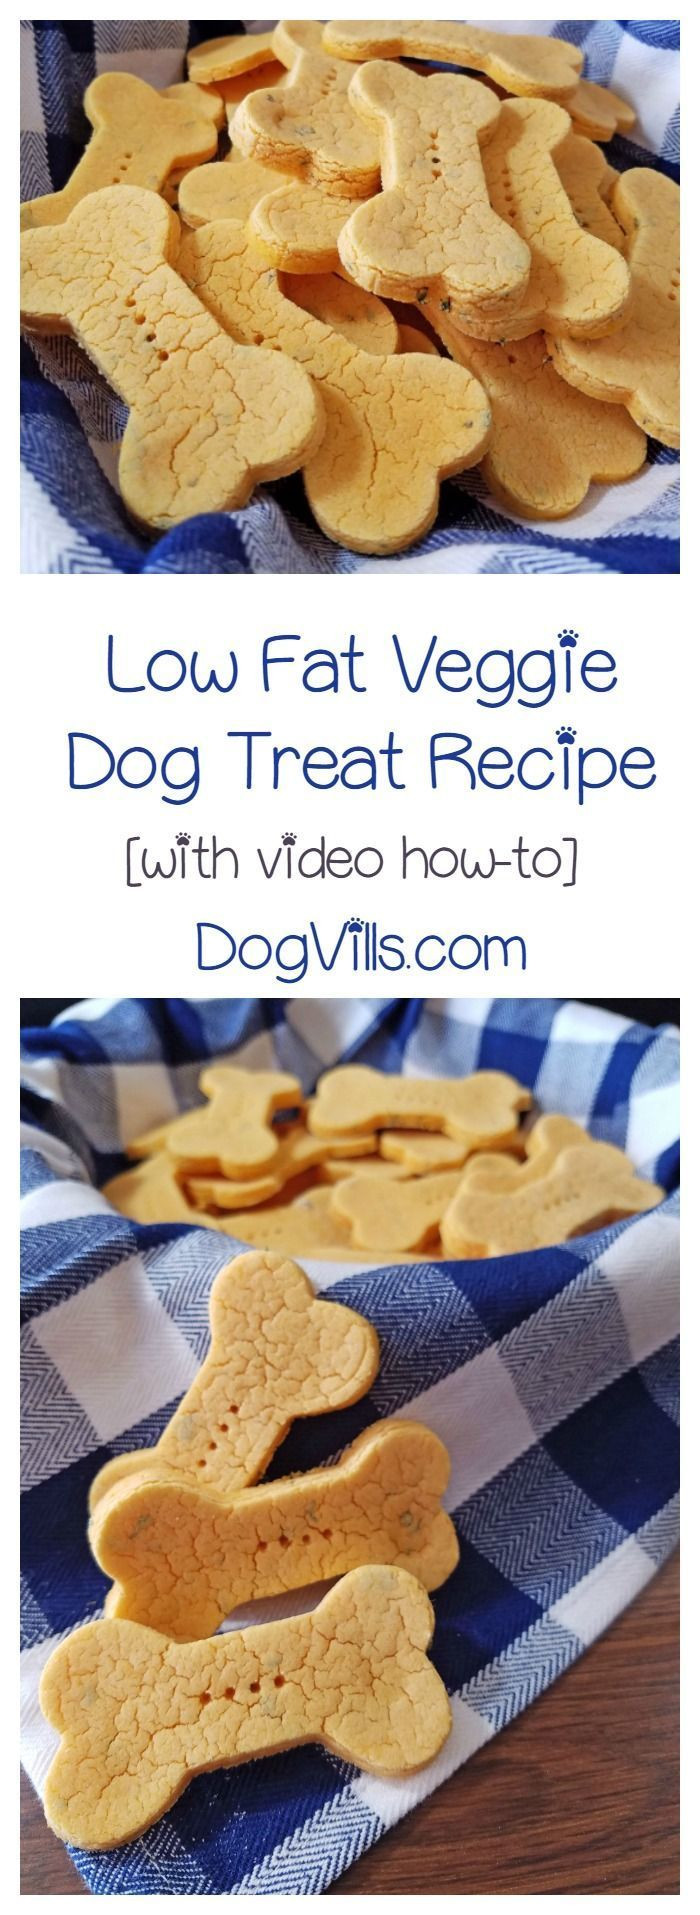 Low Calorie Dog Treat Recipes
 Dogs [with video tutorial] Recipe